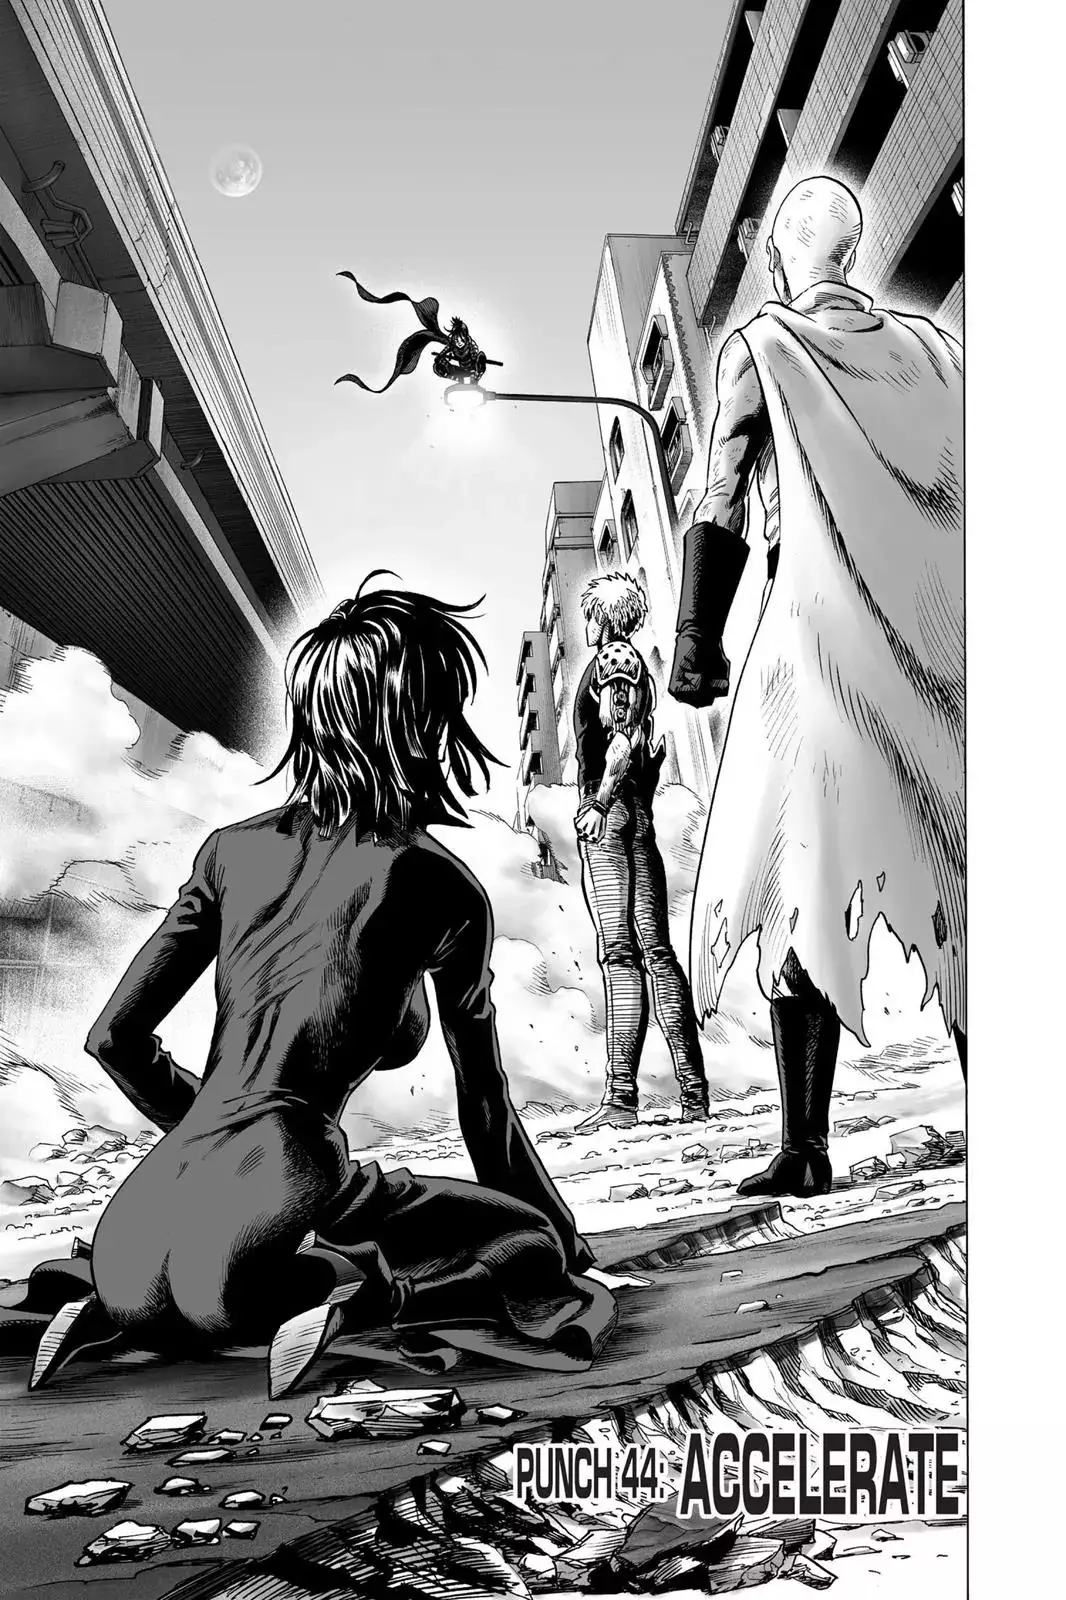 One Punch Man Chapter 44, READ One Punch Man Chapter 44 ONLINE, lost in the cloud genre,lost in the cloud gif,lost in the cloud girl,lost in the cloud goods,lost in the cloud goodreads,lost in the cloud,lost ark cloud gaming,lost odyssey cloud gaming,lost in the cloud fanart,lost in the cloud fanfic,lost in the cloud fandom,lost in the cloud first kiss,lost in the cloud font,lost in the cloud ending,lost in the cloud episode 97,lost in the cloud edit,lost in the cloud explained,lost in the cloud dog,lost in the cloud discord server,lost in the cloud desktop wallpaper,lost in the cloud drawing,can't find my cloud on network,lost in the cloud characters,lost in the cloud chapter 93 release date,lost in the cloud birthday,lost in the cloud birthday art,lost in the cloud background,lost in the cloud banner,lost in the clouds meaning,what is the black cloud in lost,lost in the cloud ao3,lost in the cloud anime,lost in the cloud art,lost in the cloud author twitter,lost in the cloud author instagram,lost in the cloud artist,lost in the cloud acrylic stand,lost in the cloud artist twitter,lost in the cloud art style,lost in the cloud analysis